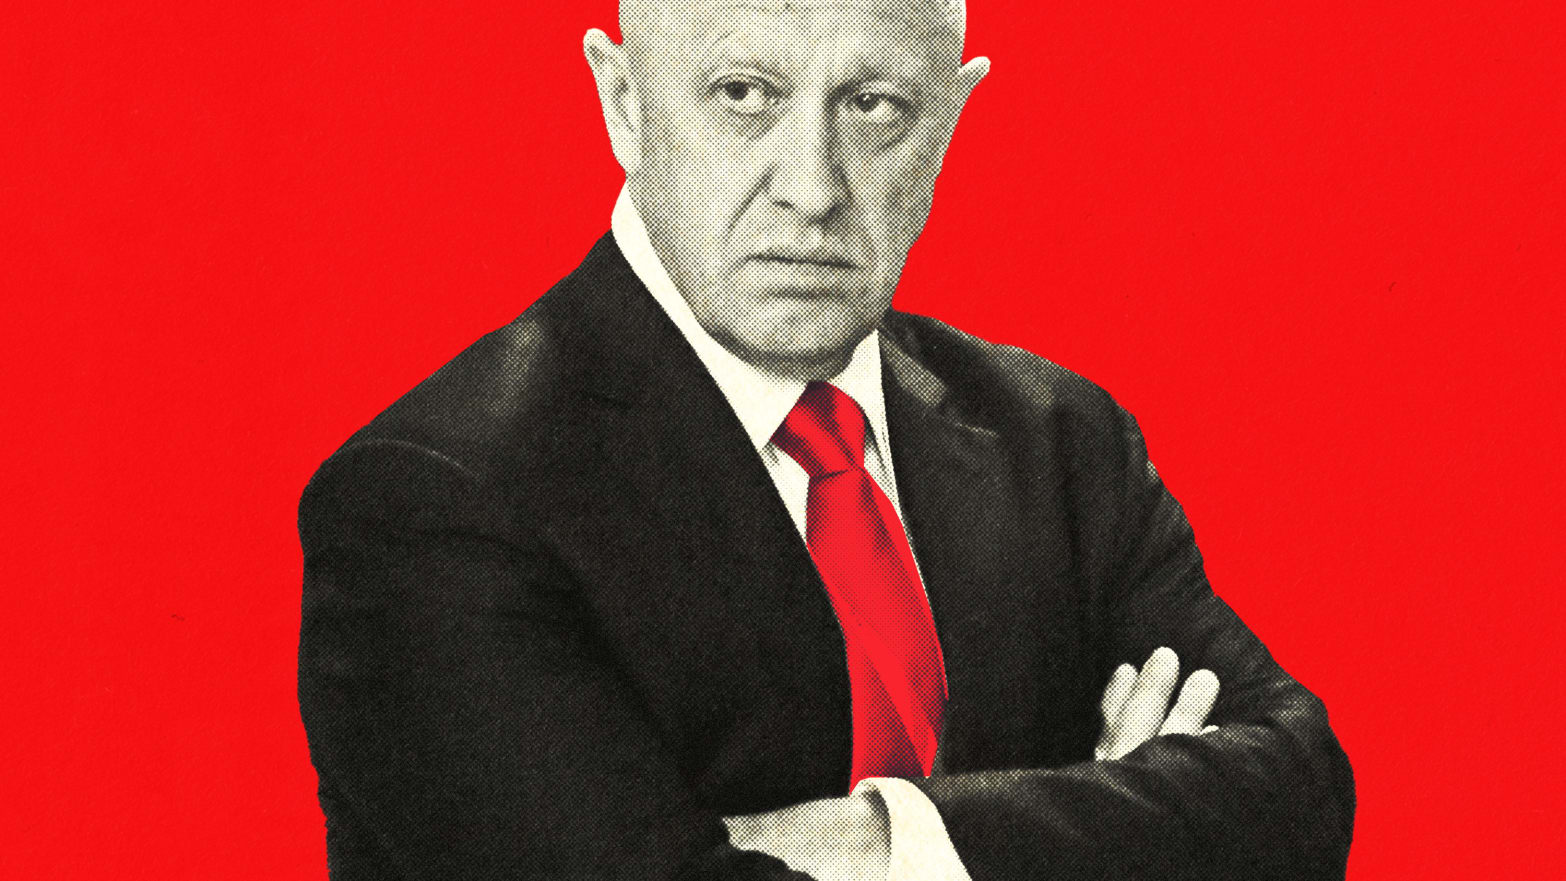 Yevgeny Prigozhin is shown in black and white with his arms crossed and wearing a red tie on a red background